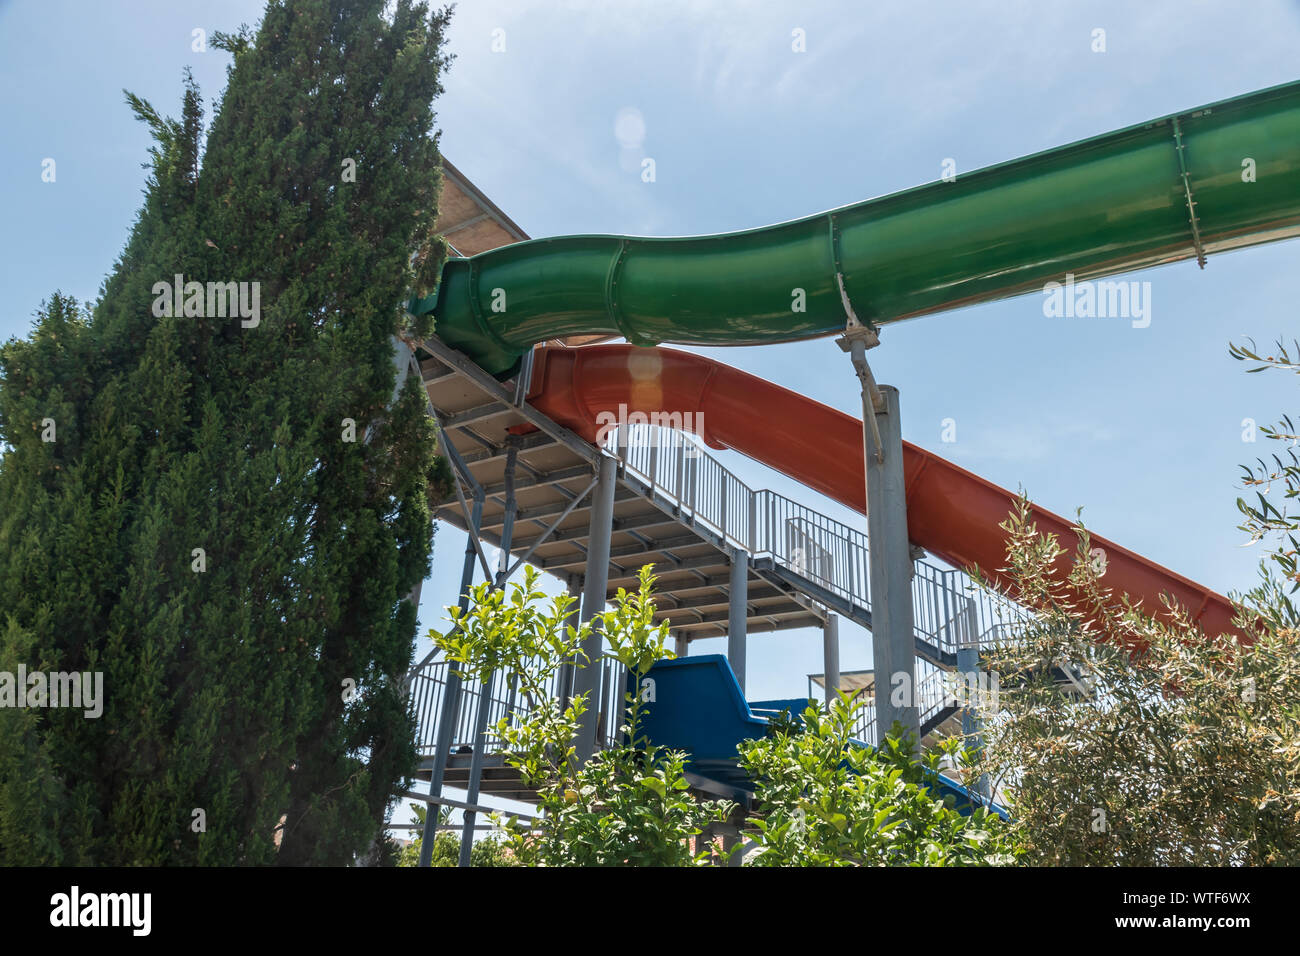 Here is the aqua park water slides. Green, red and blue water slided. Blue sky with green trees. Stock Photo